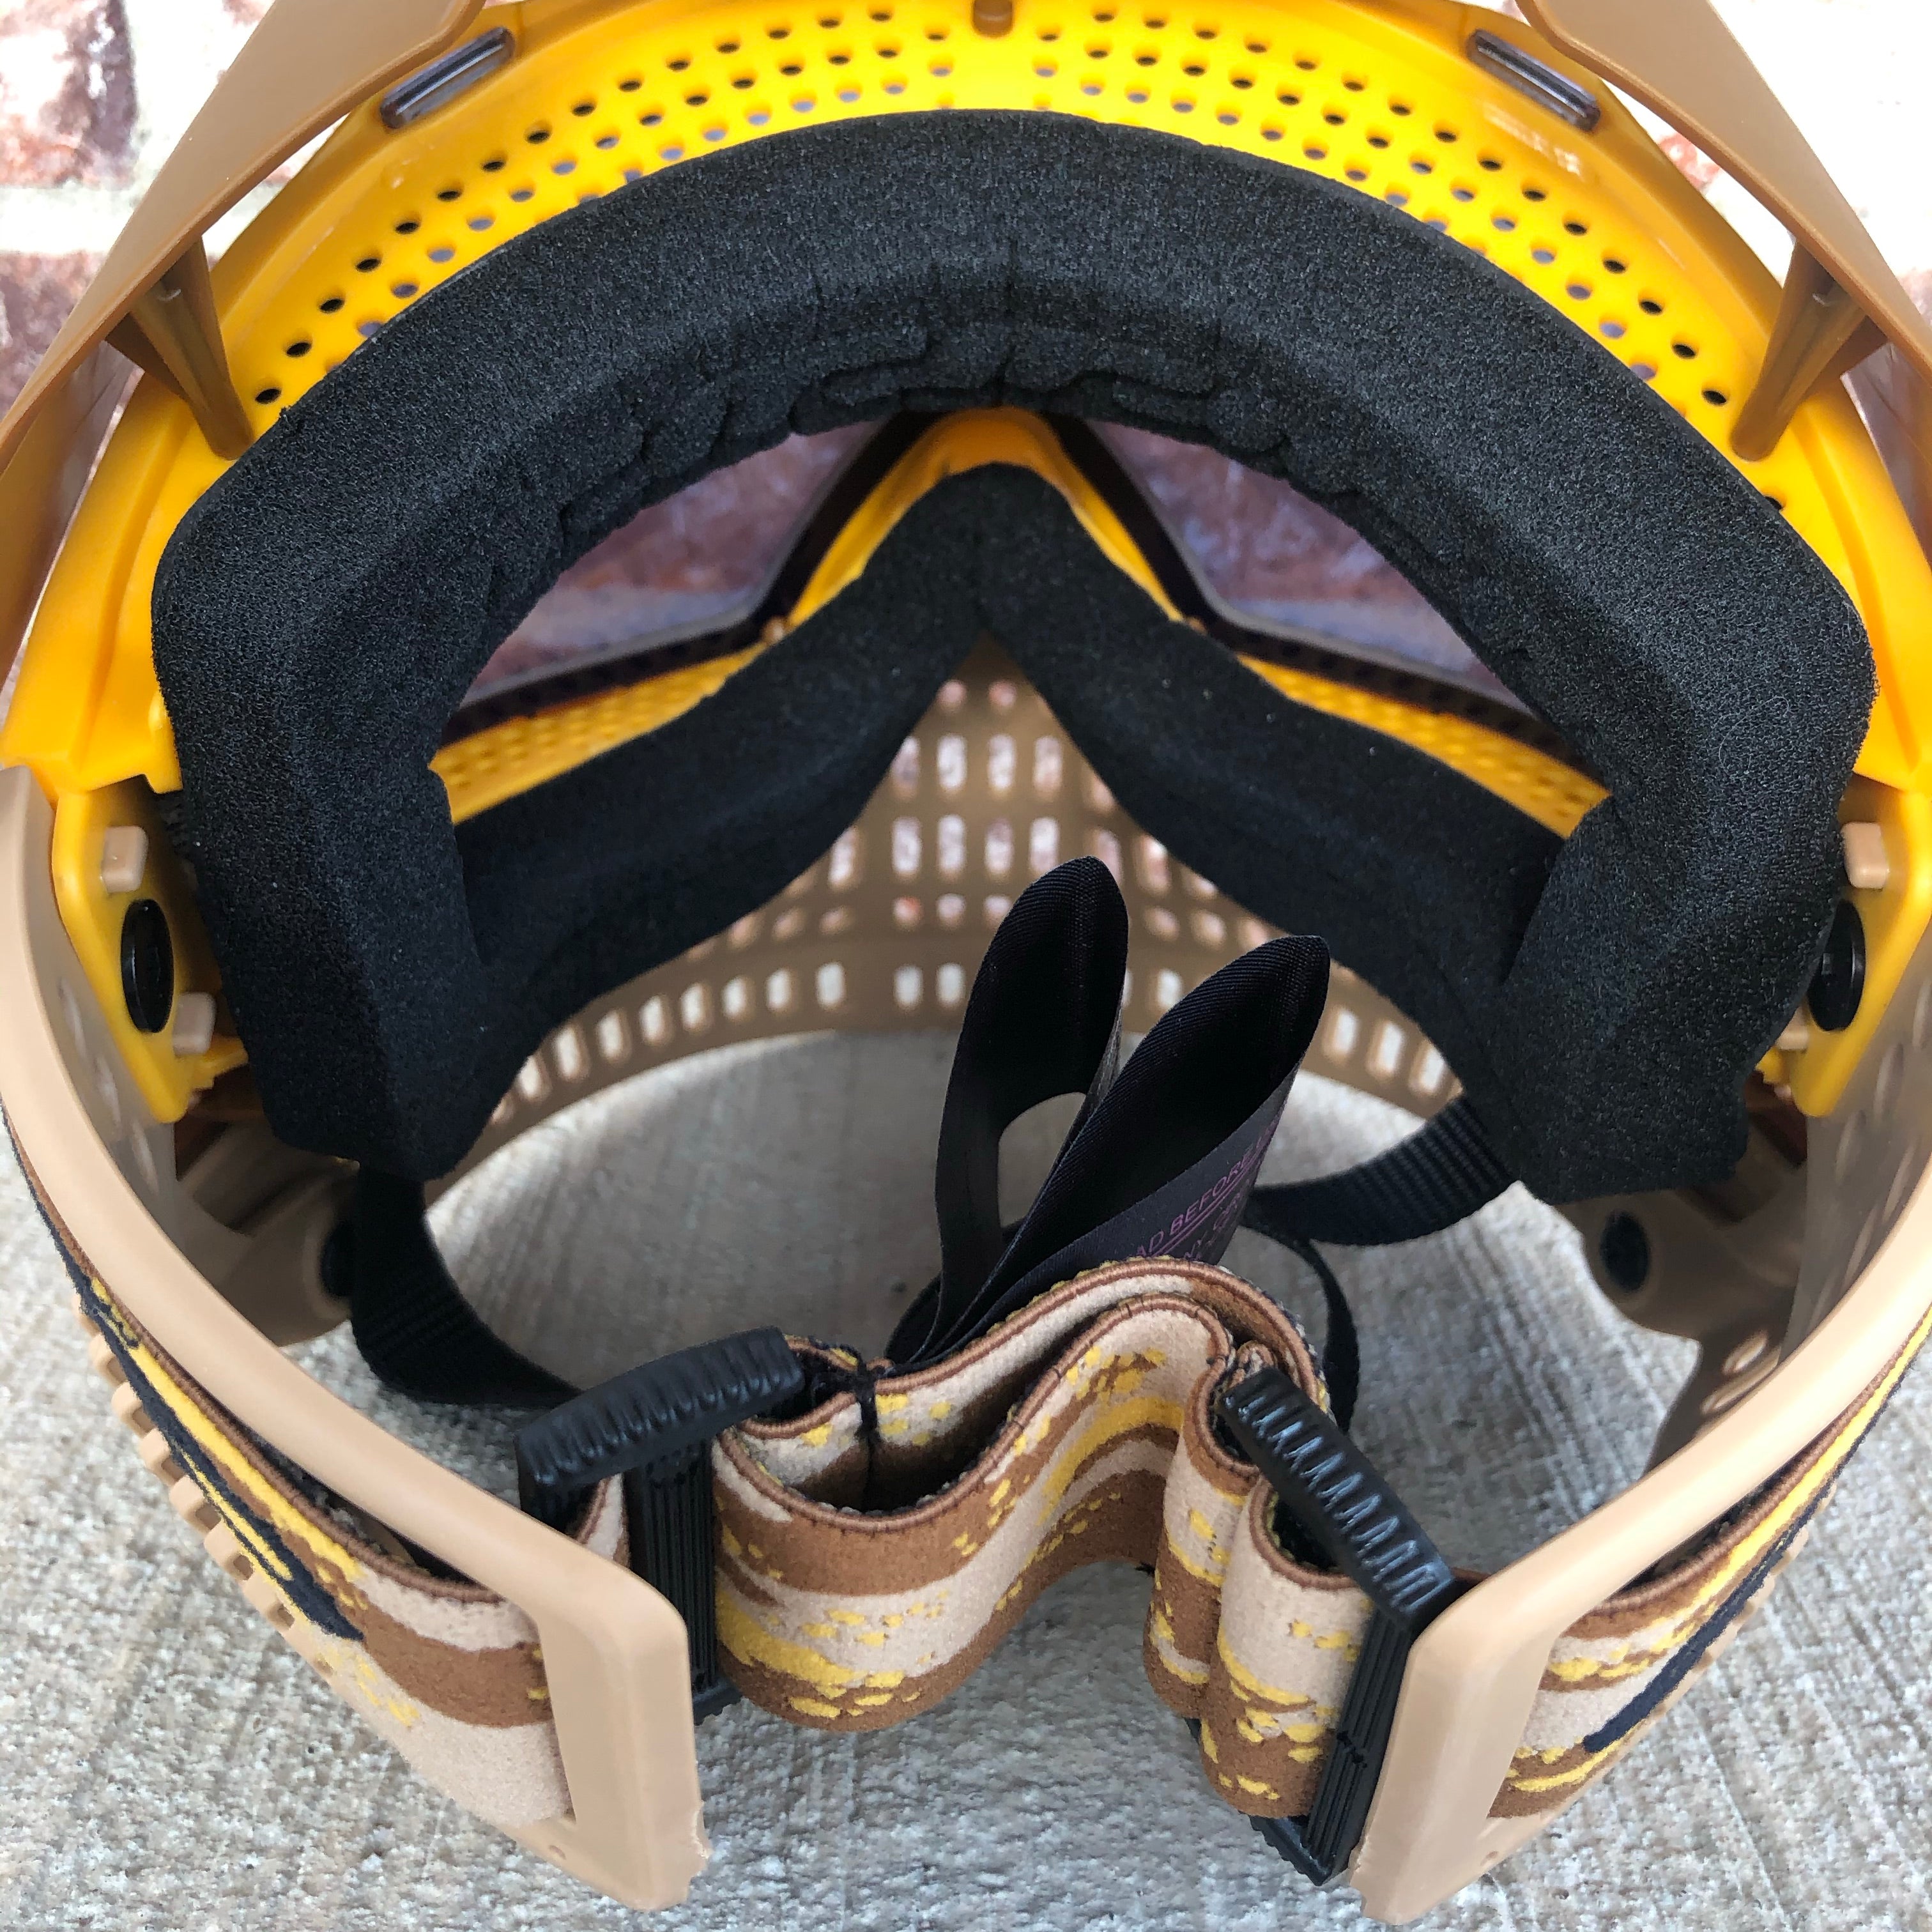 Used JT Proflex Paintball Mask - Brown/Tan/Gold w/ Gold Thermal Lens